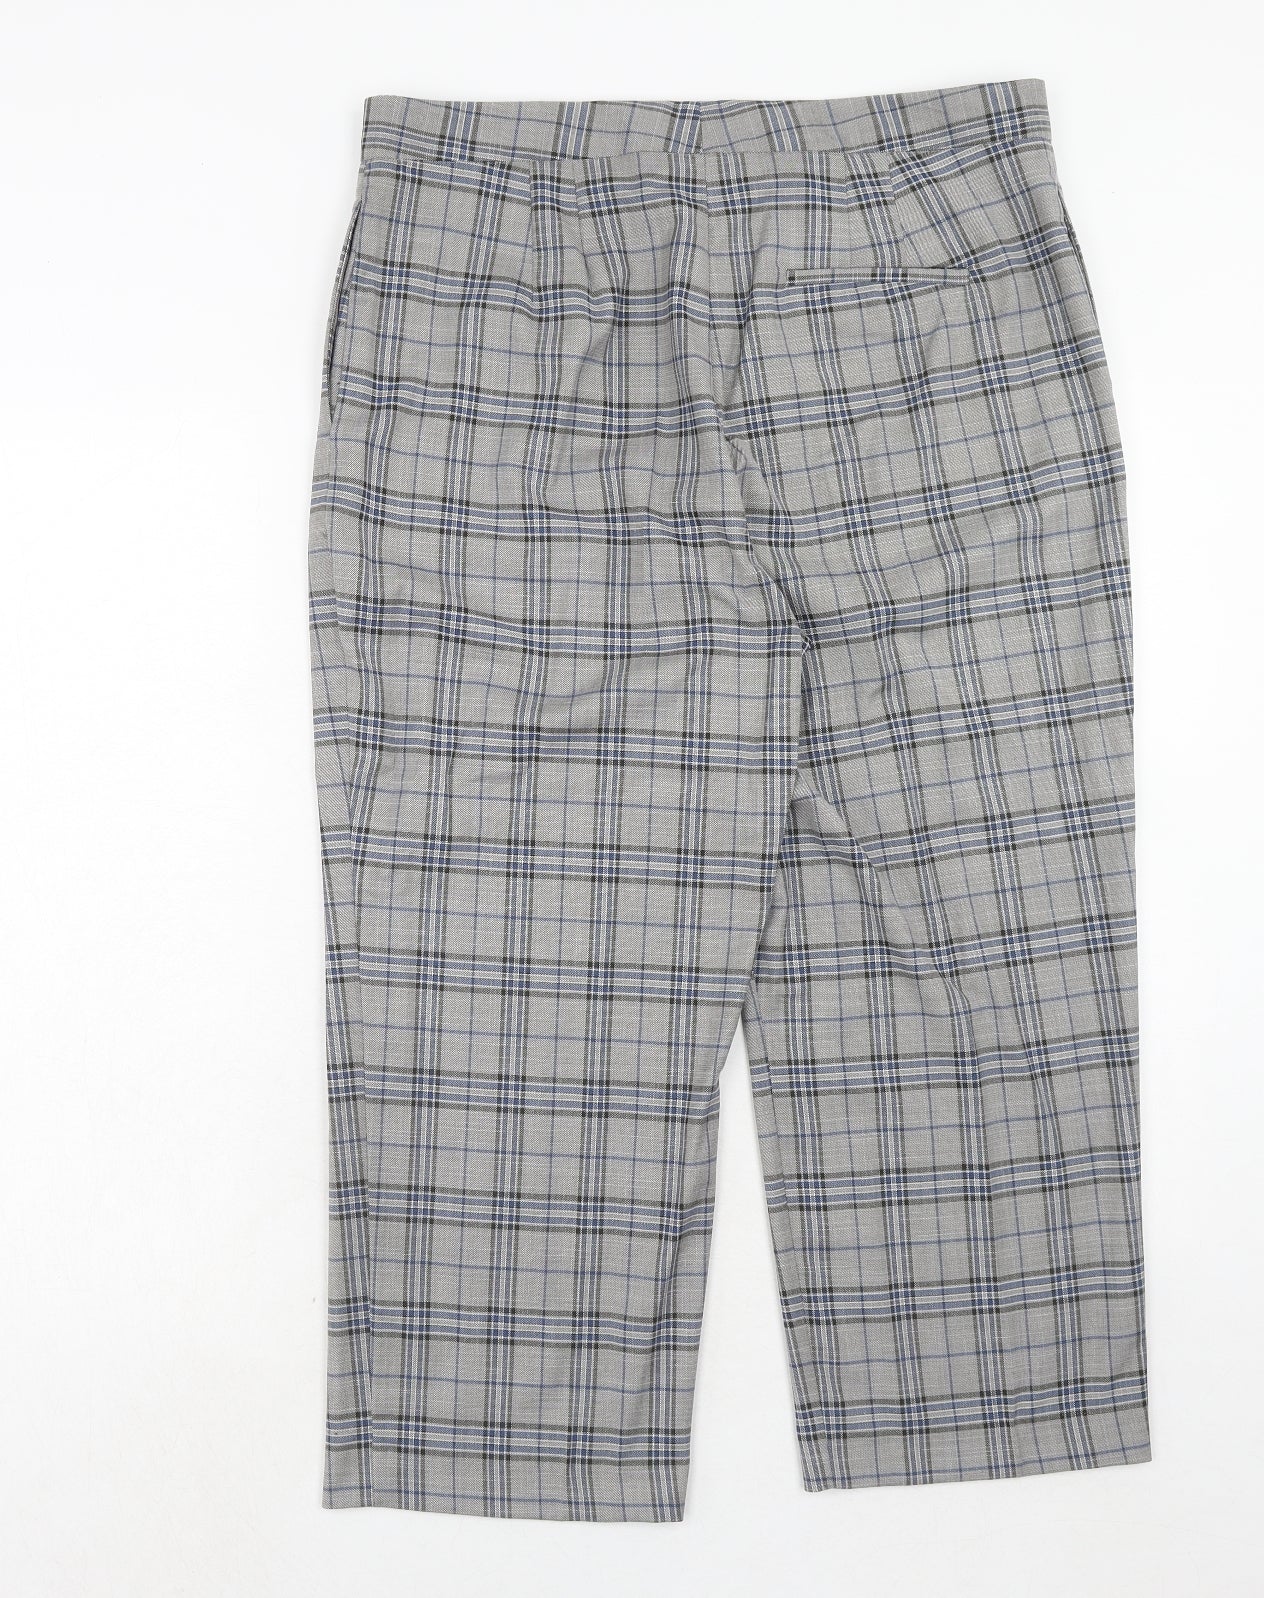 Marks and Spencer Womens Grey Plaid Polyester Trousers Size 16 Regular Hook & Eye